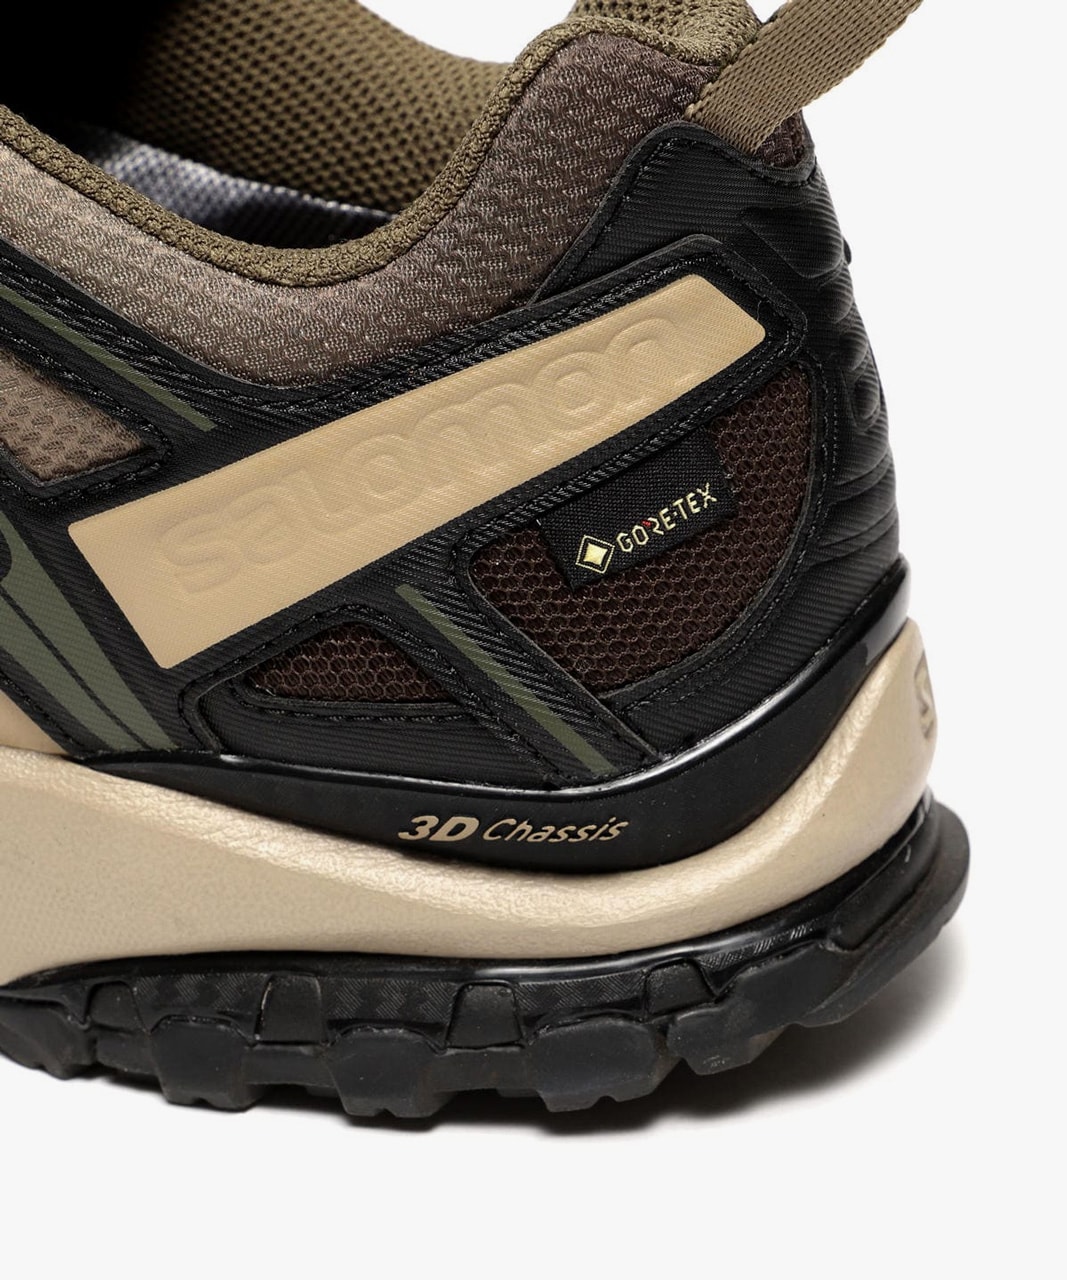 beams salomon xa pro 3d gtx gore tex brown tan olive black woodland camo official release date info photos price store list buying guide